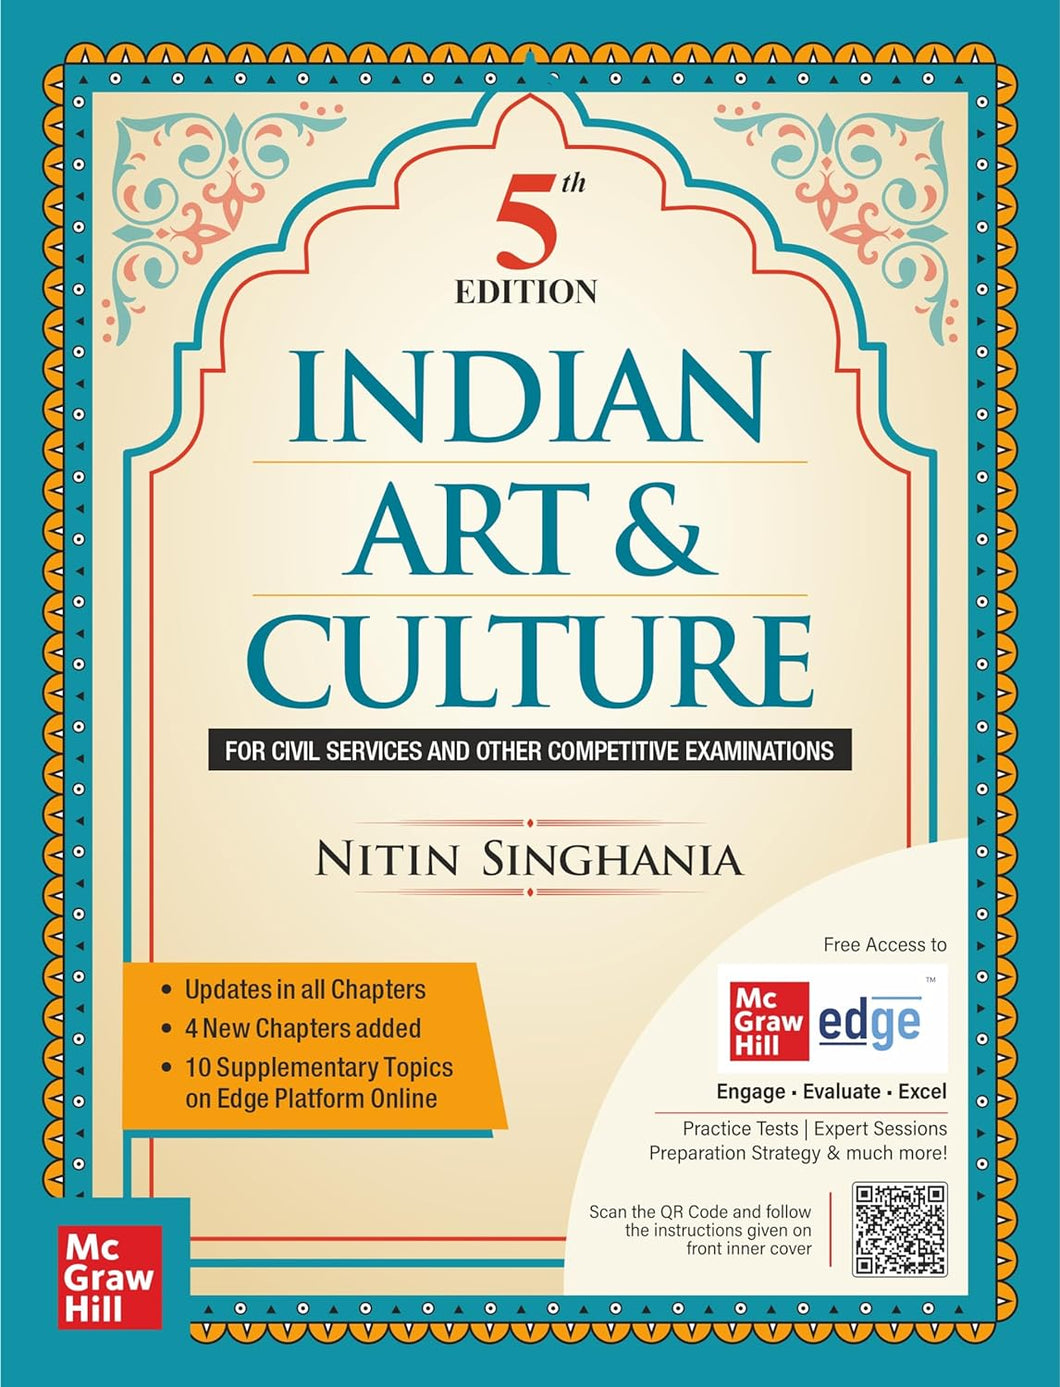 Indian Art and Culture for Civil Services and other Exams by Nitin Singhania